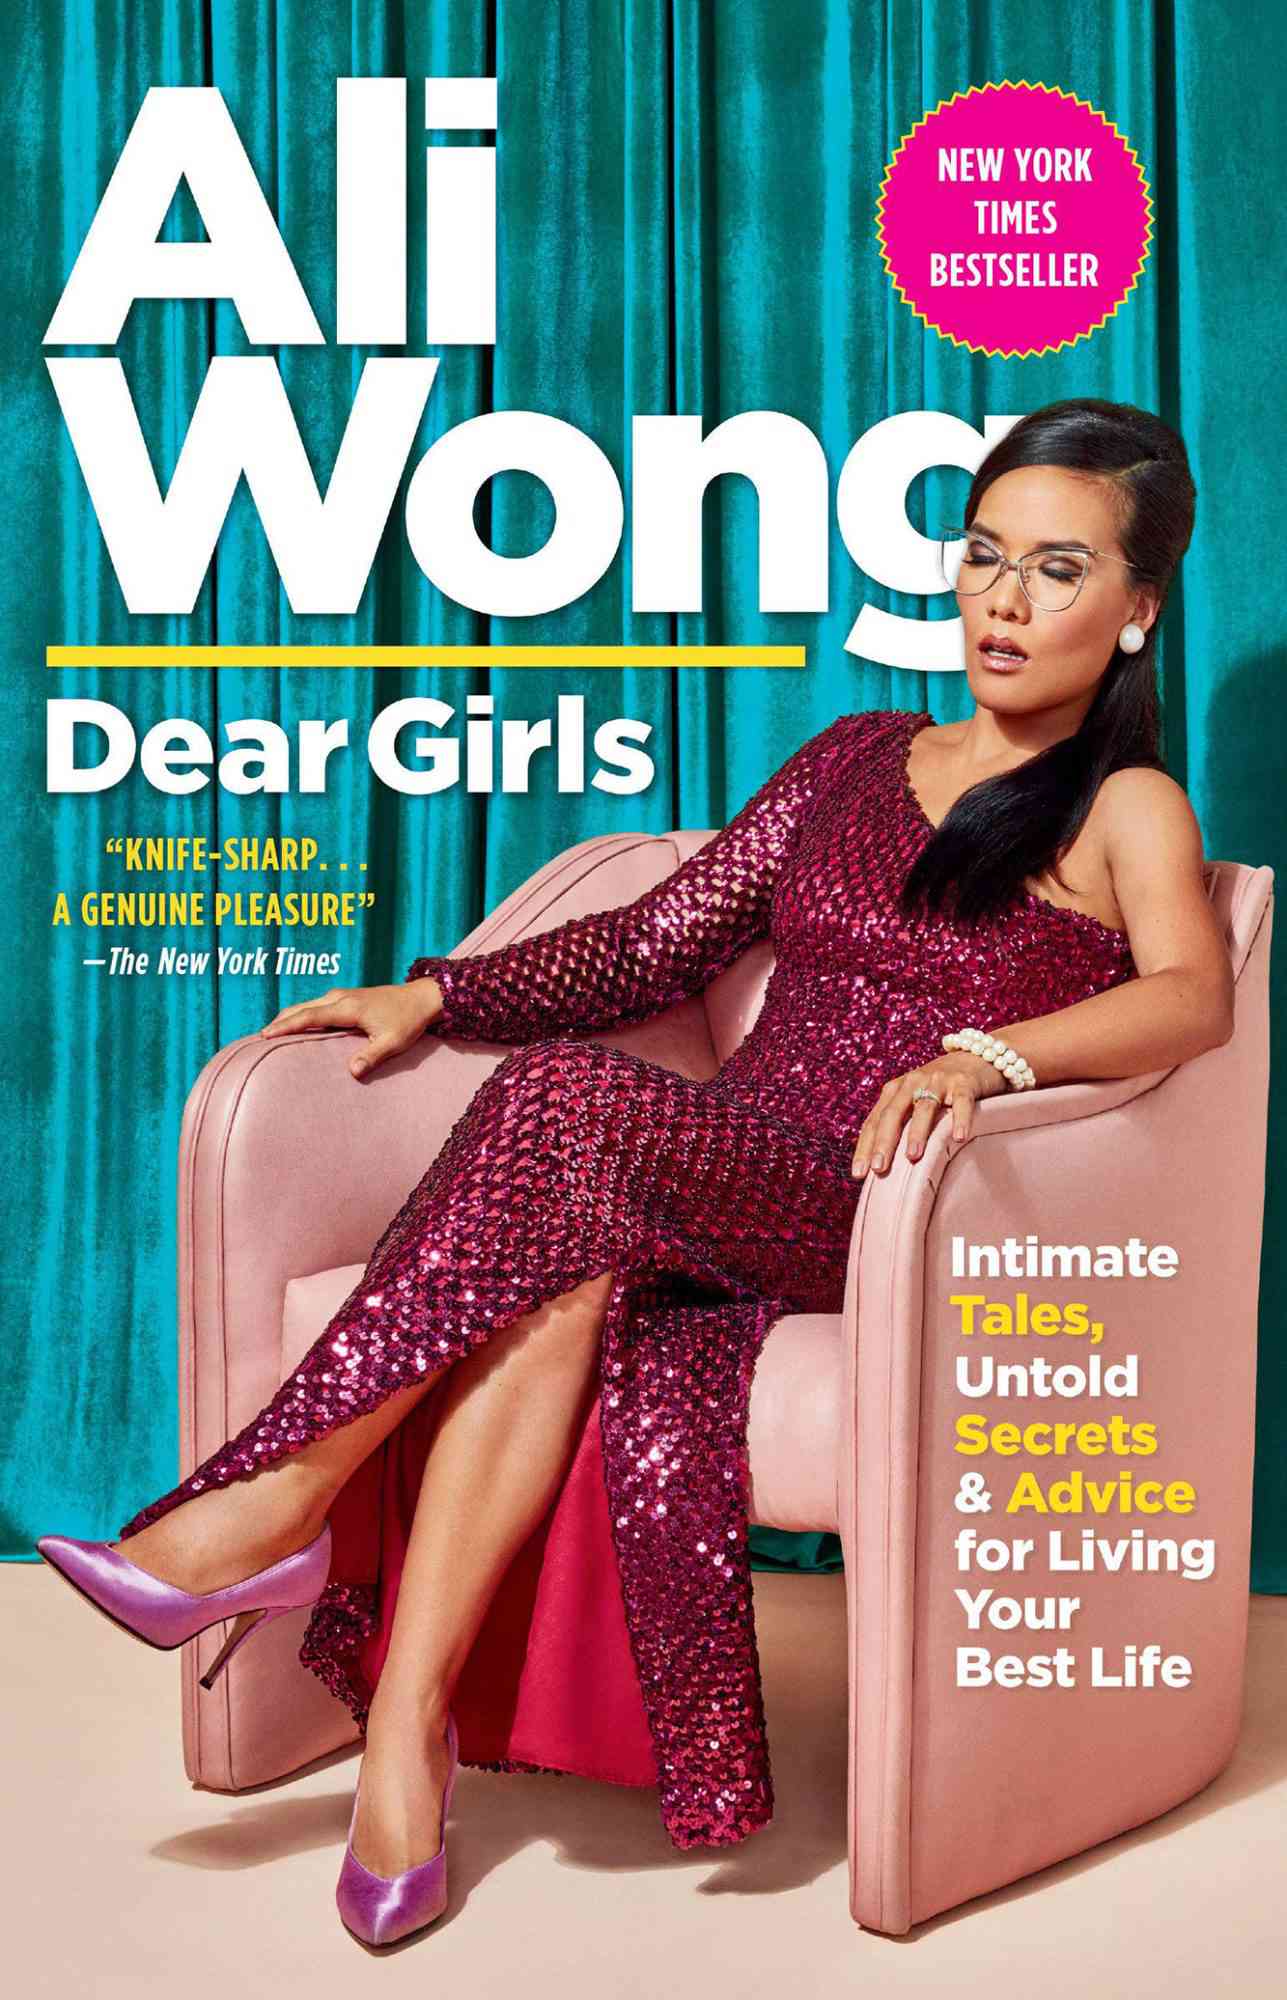 57. Ali Wong, Dear Girls: Intimate Tales, Untold Secrets & Advice for Living Your Best Life